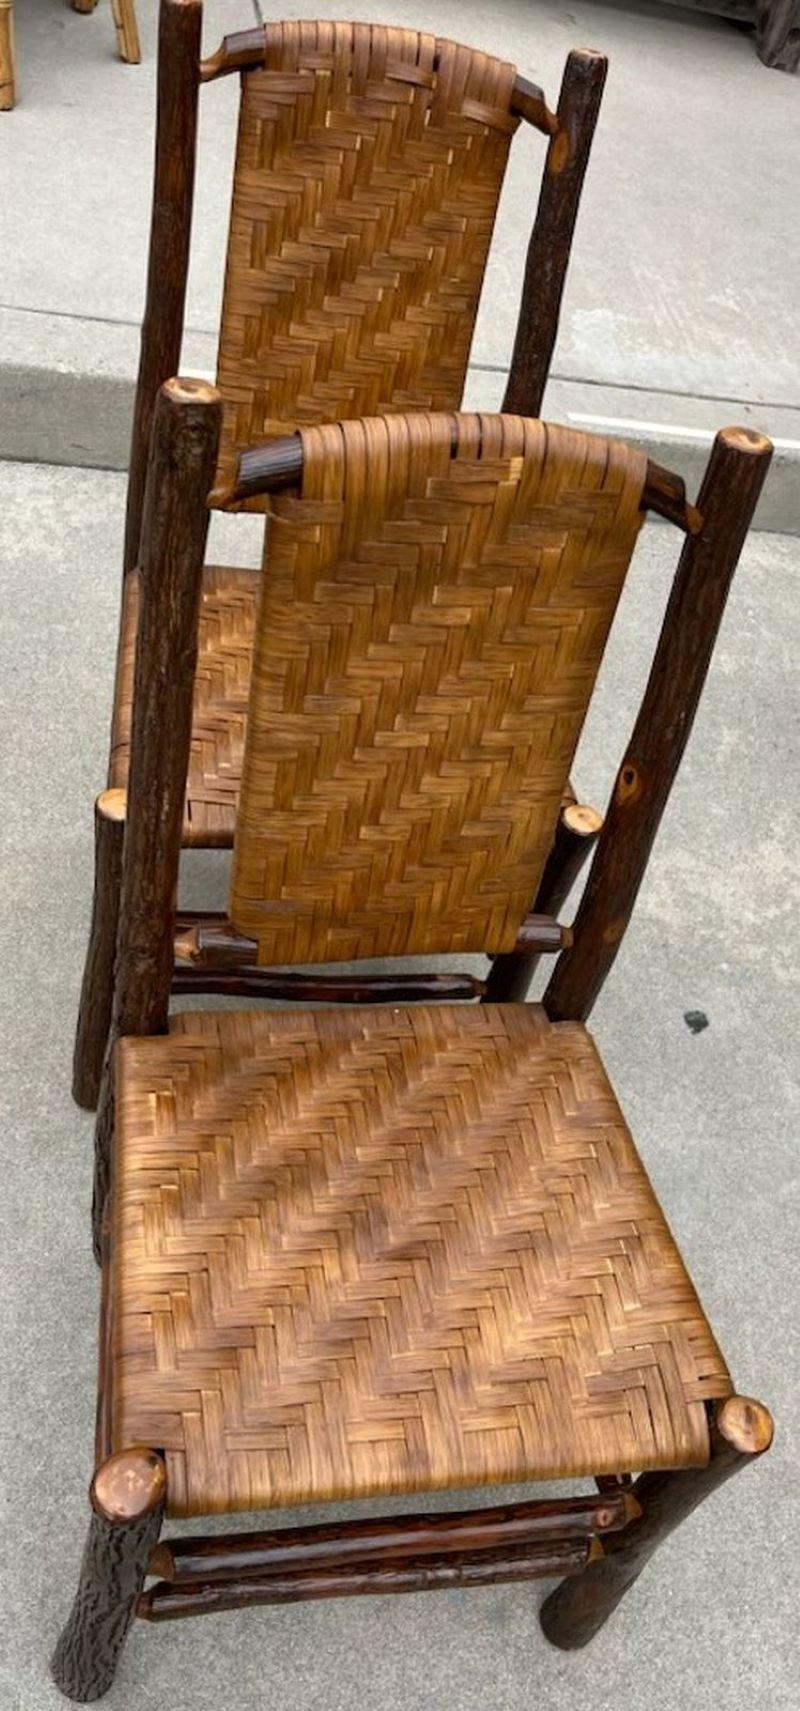 These fine Old Hickory chairs are in fine condition. Wonderful patina and unmatched age and beauty for Adirondack items. The condition are all very good and comfortable.

Original back and hand woven seats.